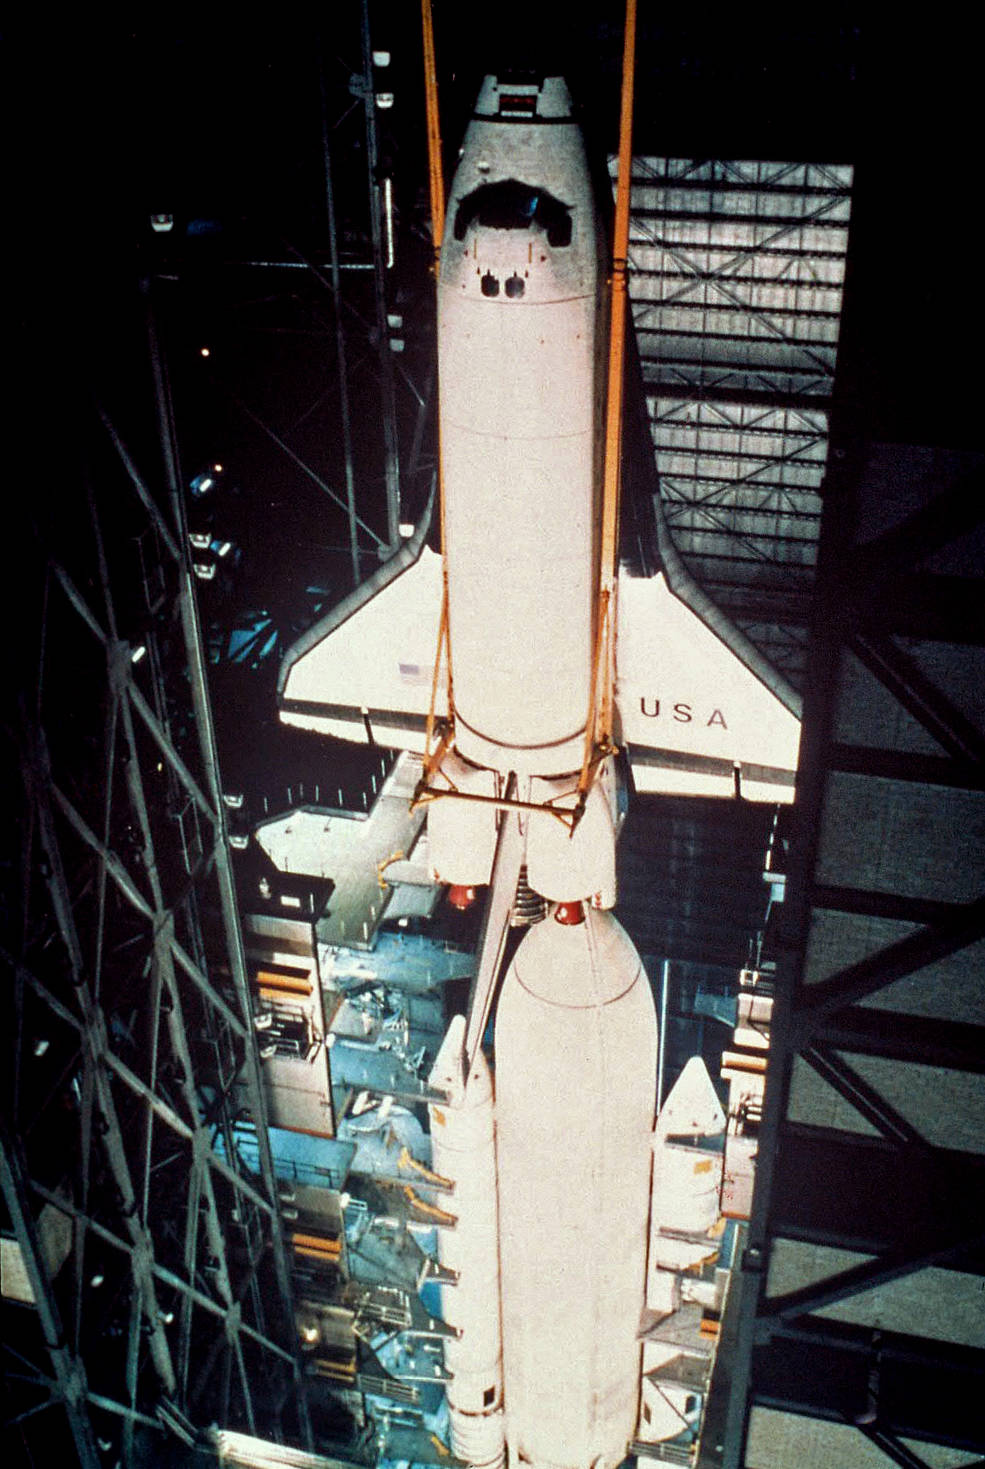 sts1-0543-noid-11.25.80